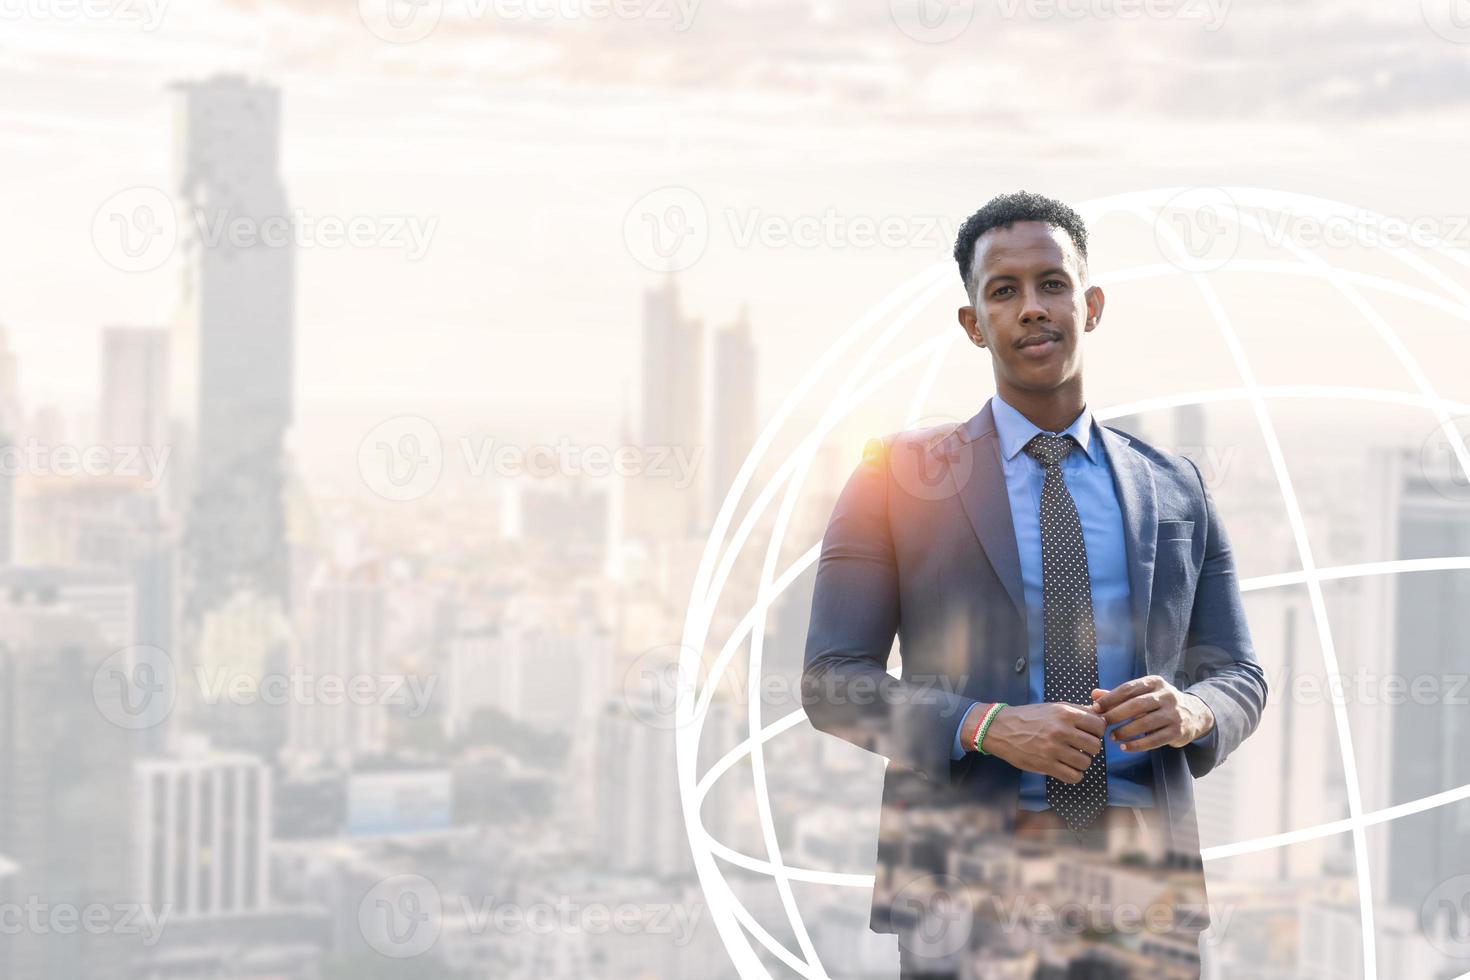 Business people in city. Portrait of an handsome businessman. Modern businessman. Confident young man in full suit and glasses while standing outdoors looking away with cityscape in the background photo